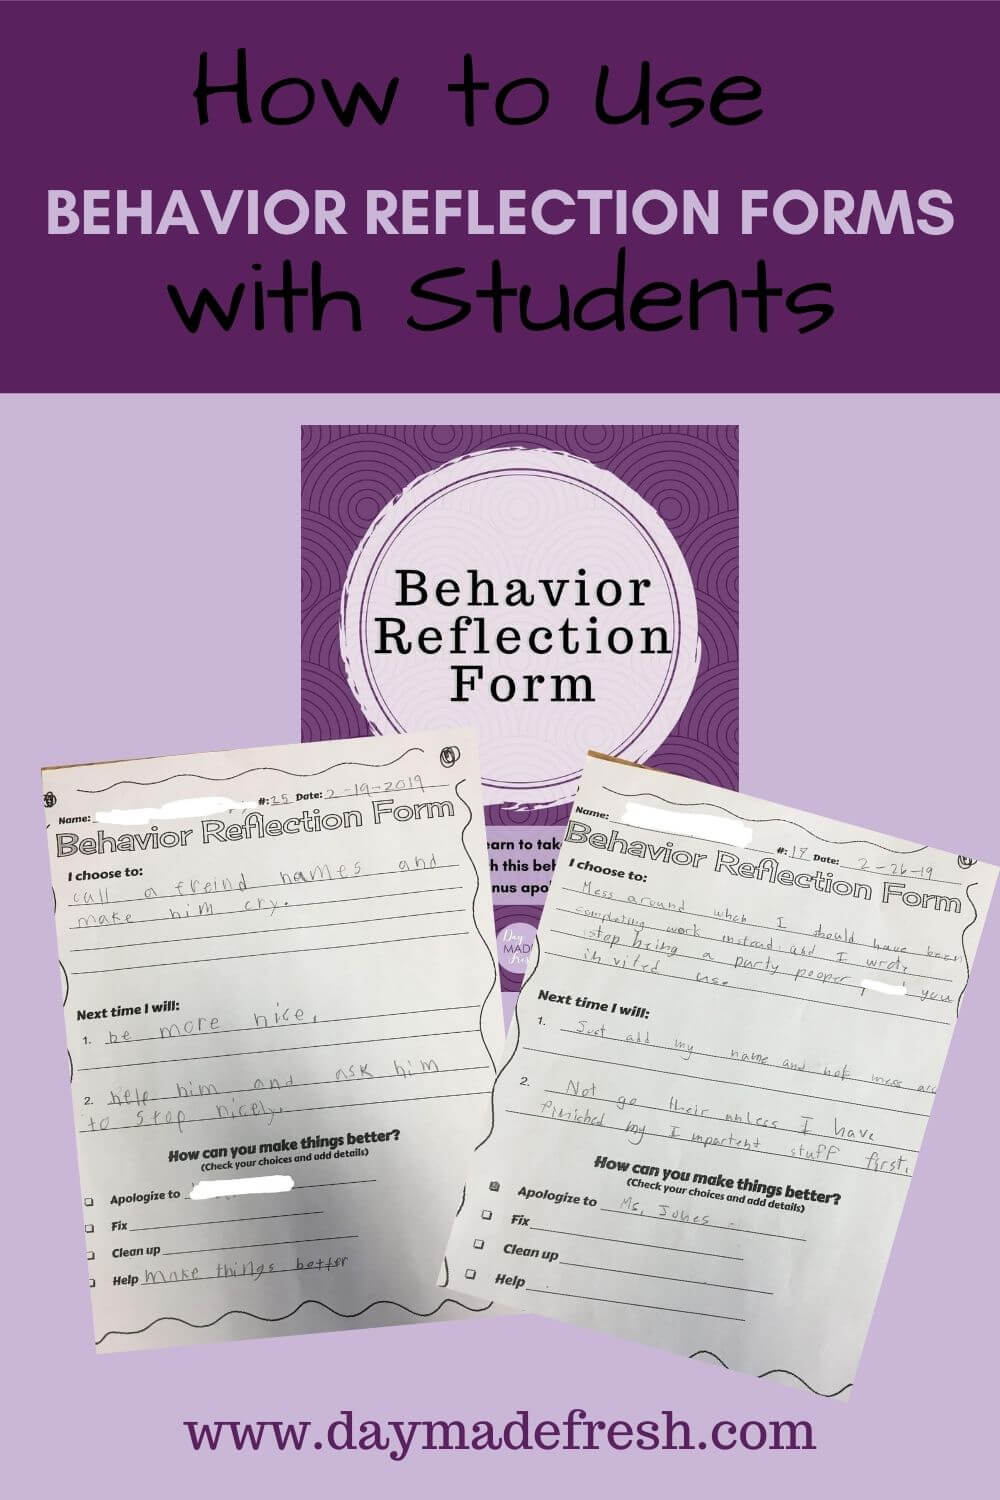 Examples of Student Behavior Reflection Forms: How to Use Behavior Reflection Forms with Students